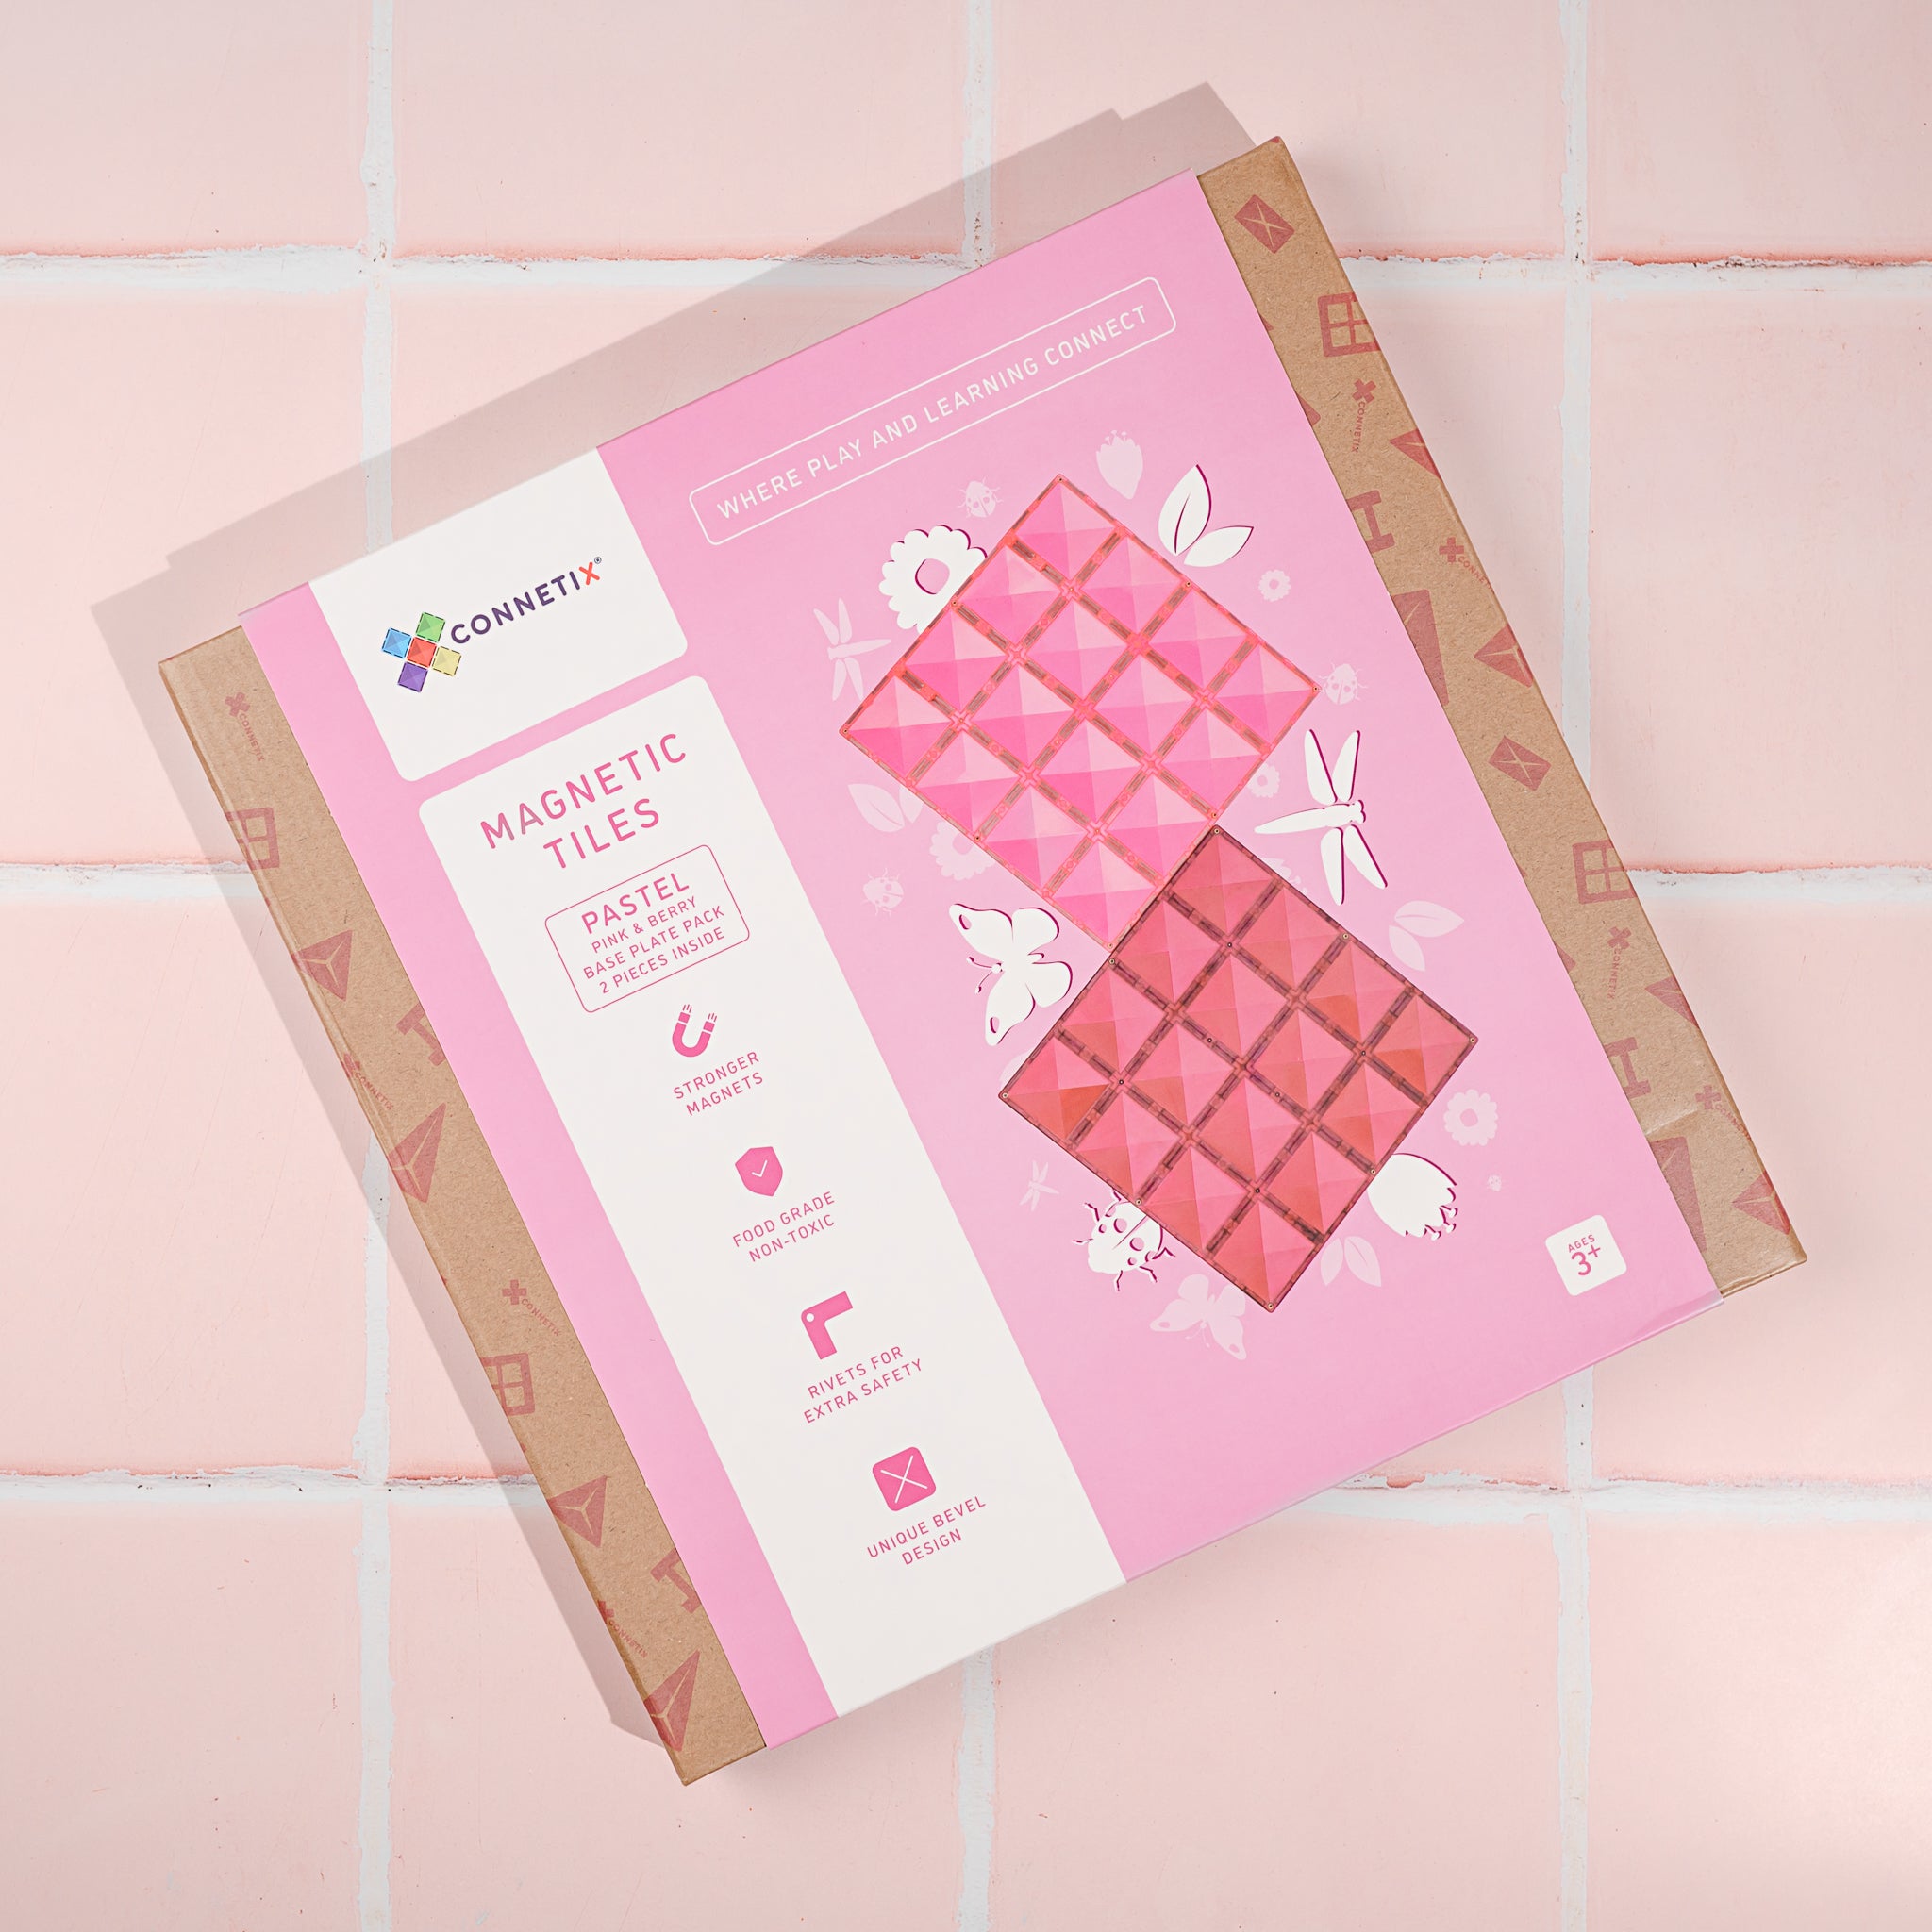 Connetix | Base Plate Pack - Pink & Berry 2pc